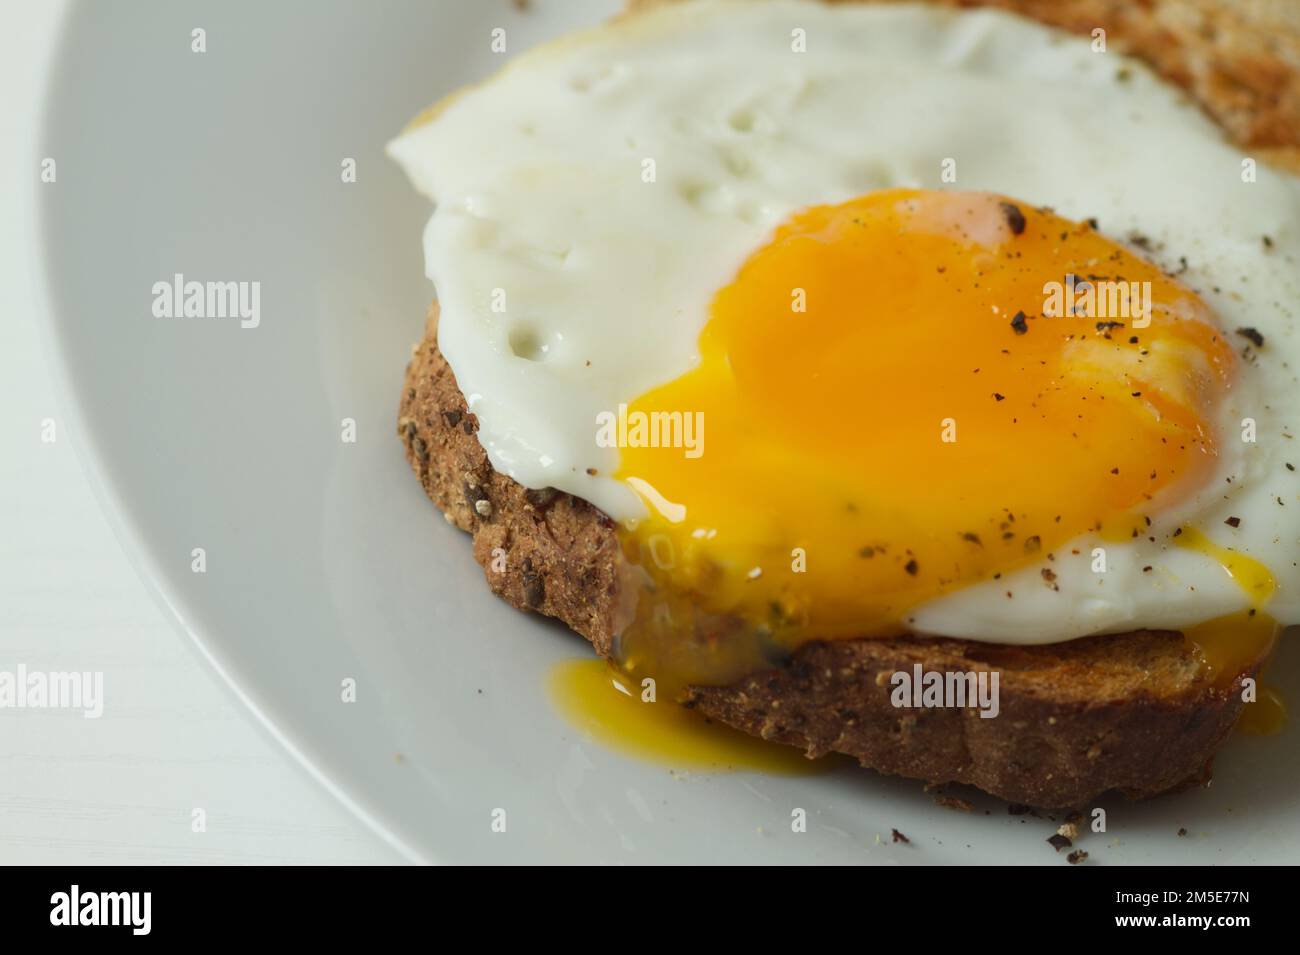 Fried egg on a slice of toasted seeded bread with black pepper sprinkled on top Stock Photo